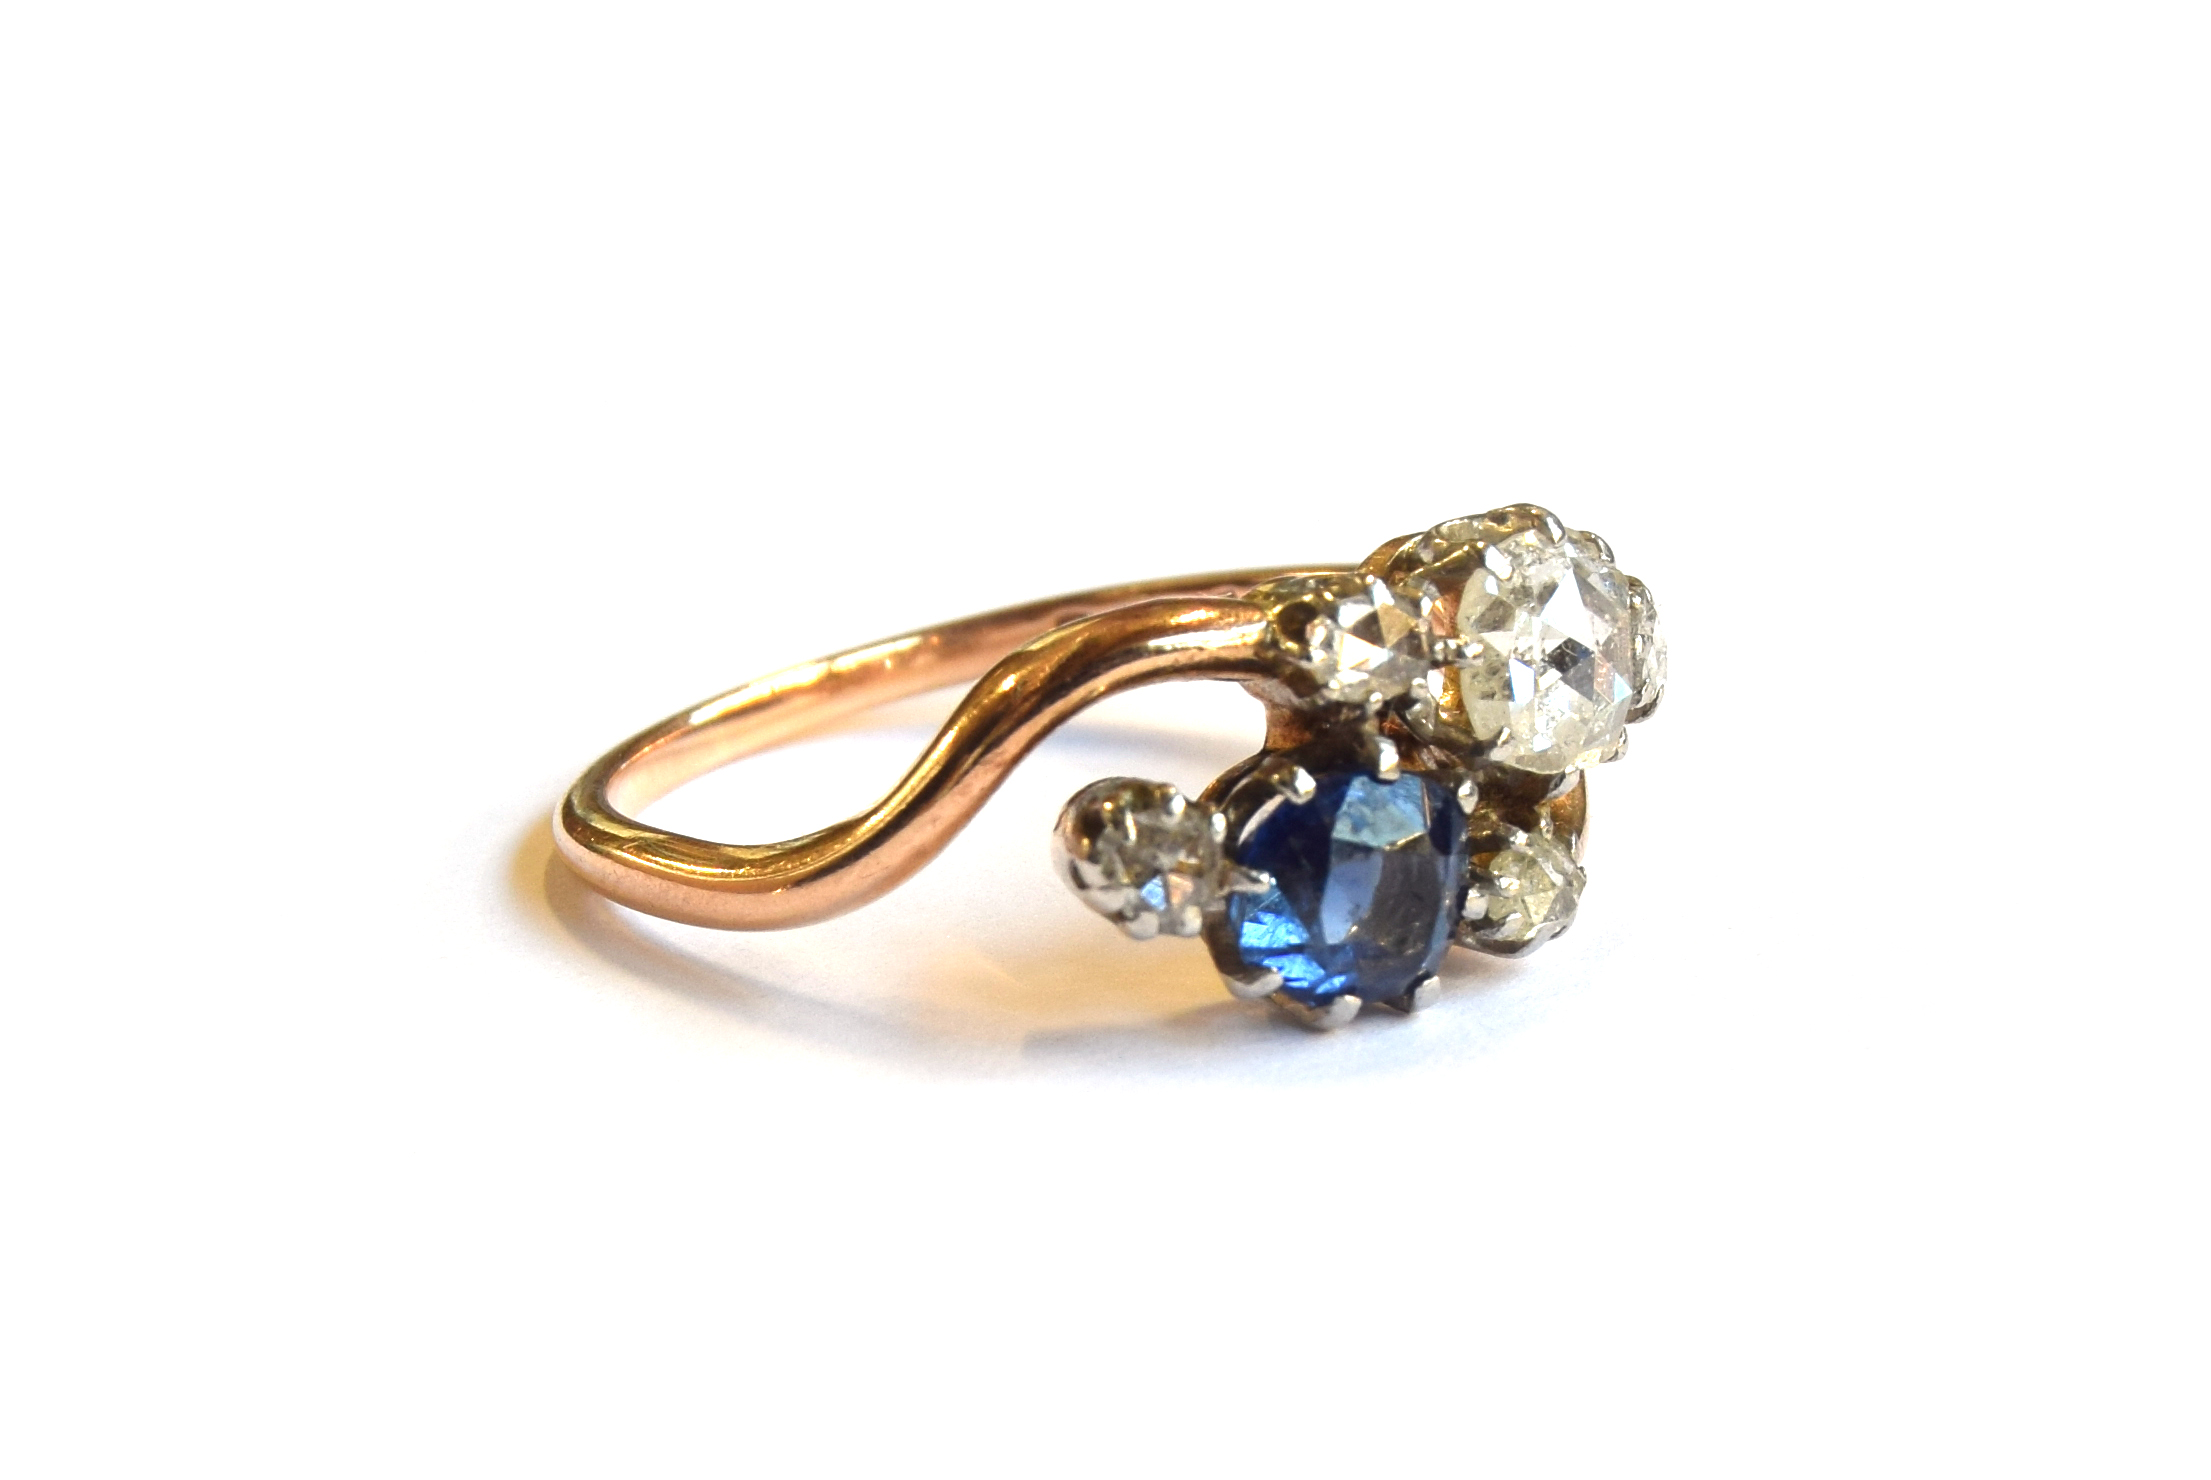 An early 20th century 18ct gold 'Toi et Moi' diamond and sapphire crossover ring, the large rose cut - Image 2 of 6